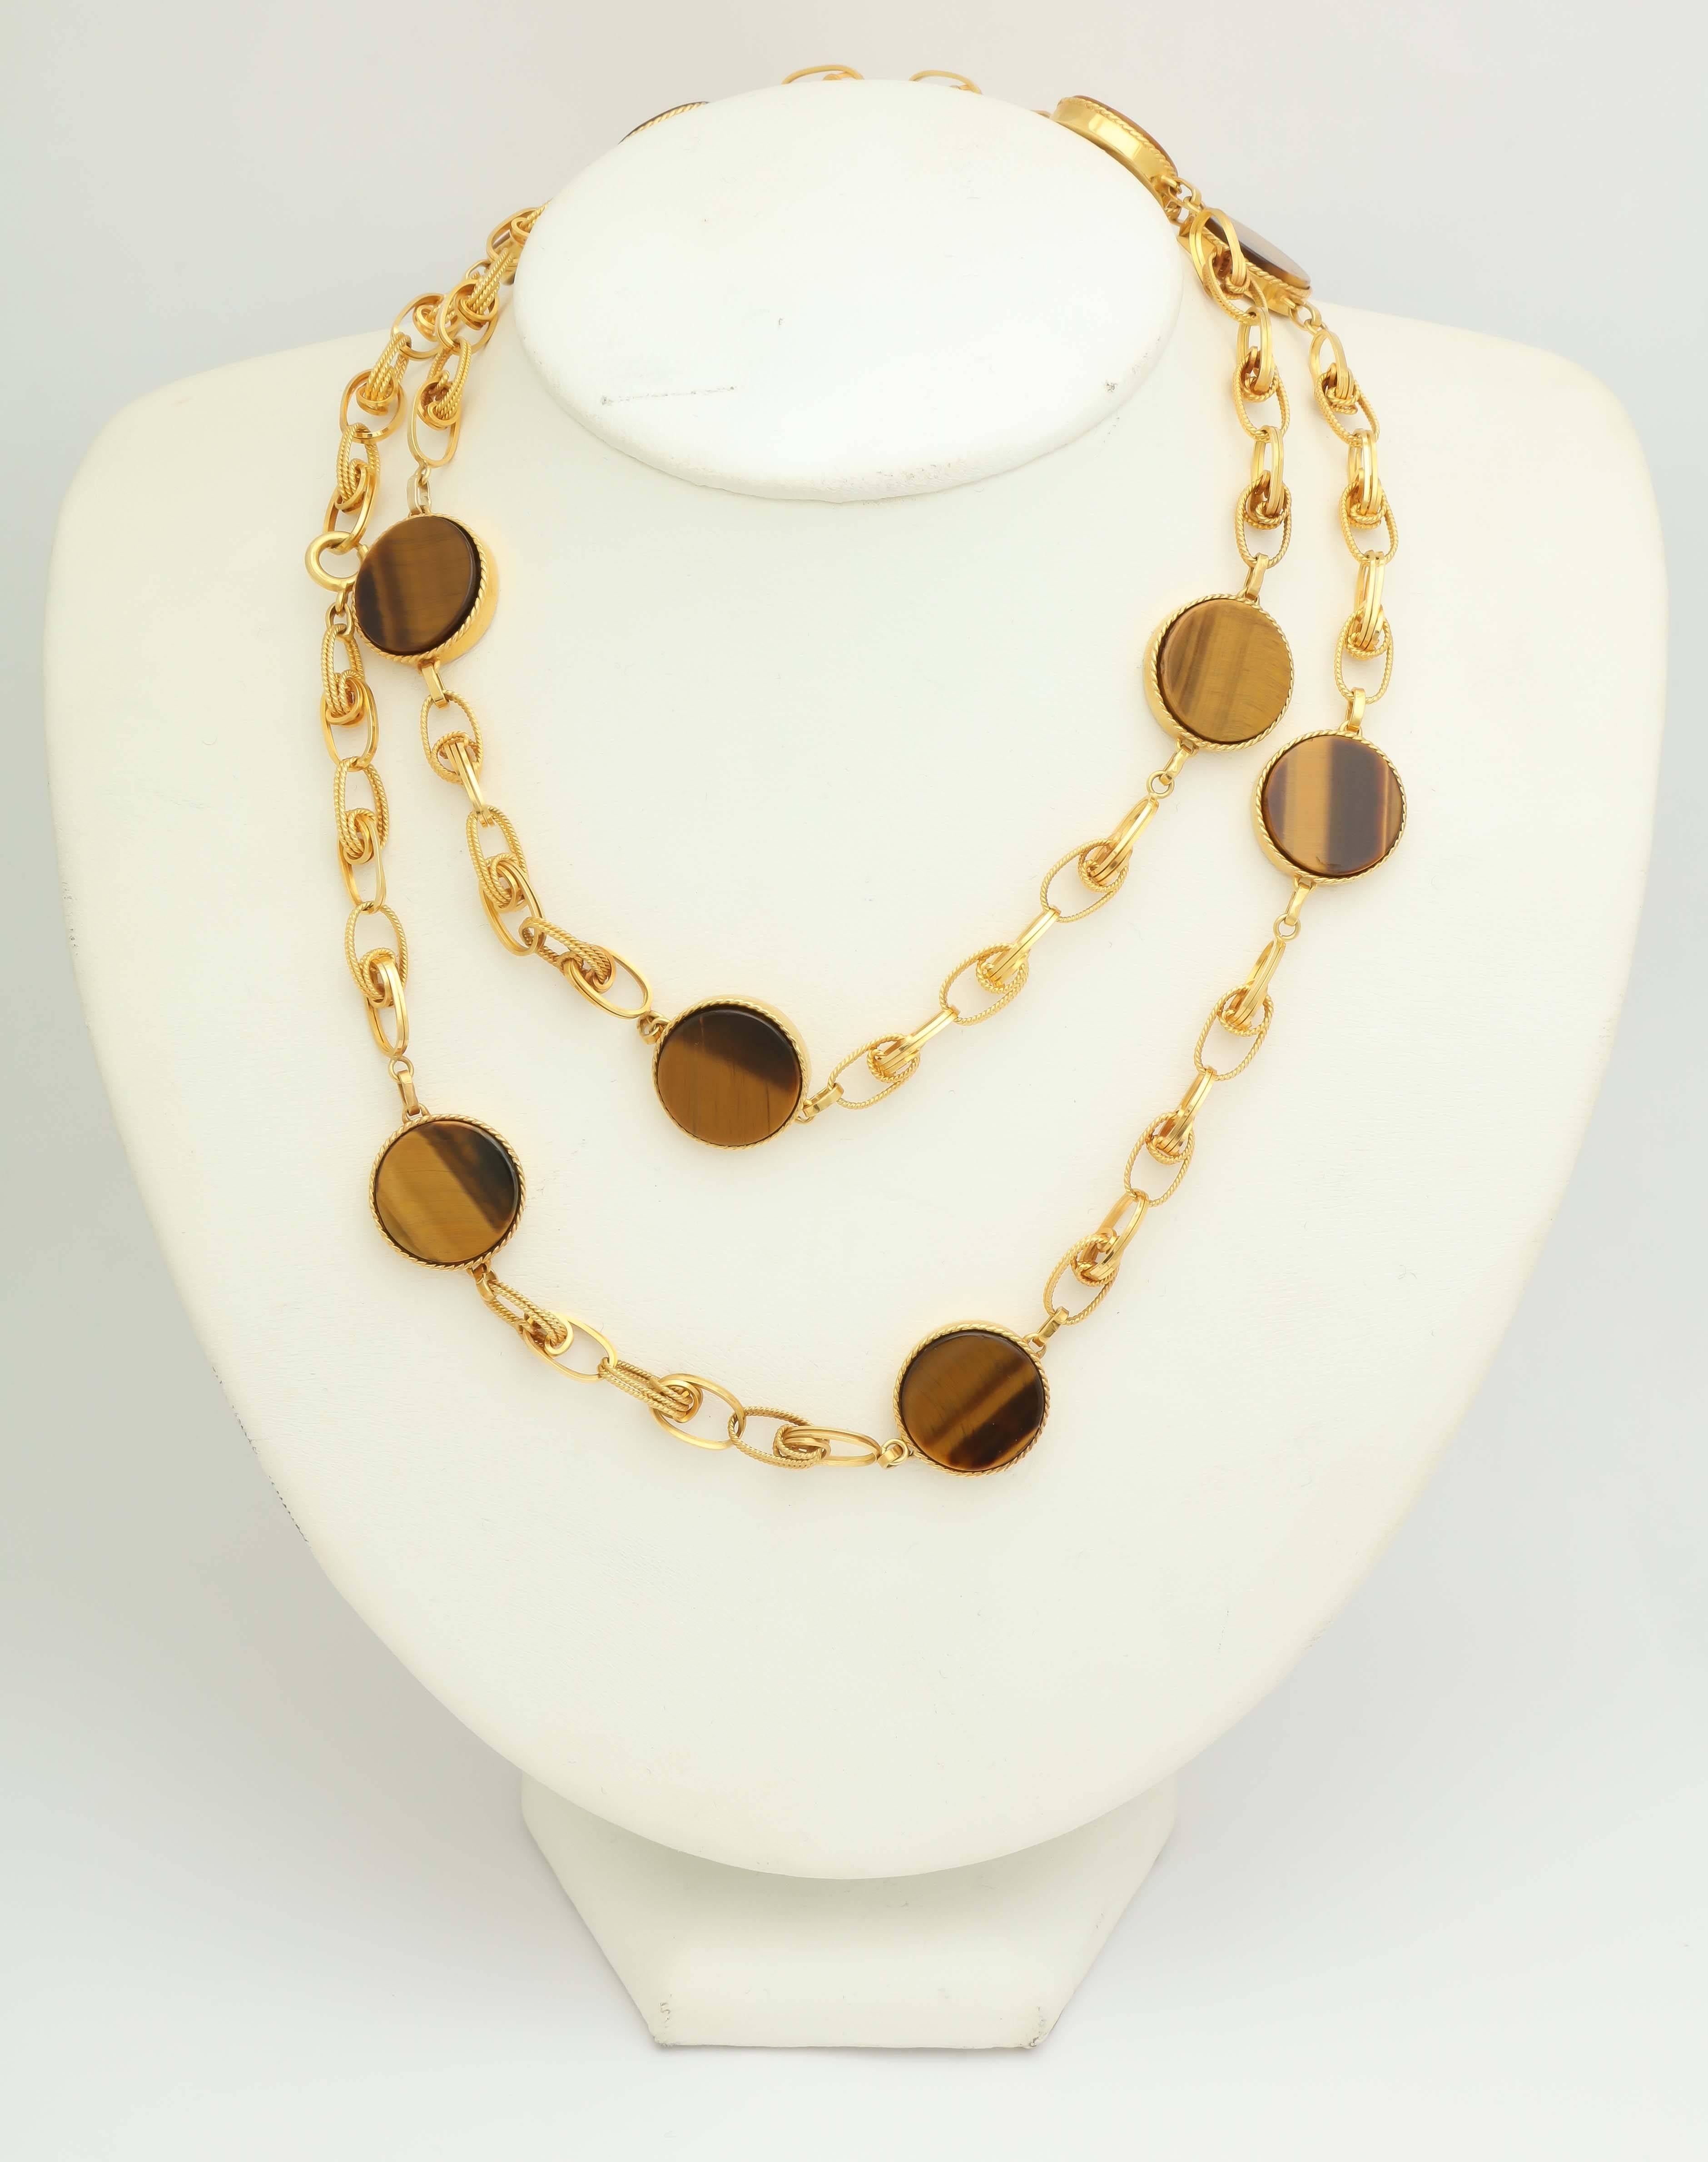 18kt Yellow Gold Ensemble Consisting Of A Long Chain/Necklace Designed With 10 High Quality Tiger's eye Stones in A Disc Style Motif Set In A Round Bezel Setting. Ensemble Also Exhibiting An Intertwined Open Link Design. Note: May Be Worn On The